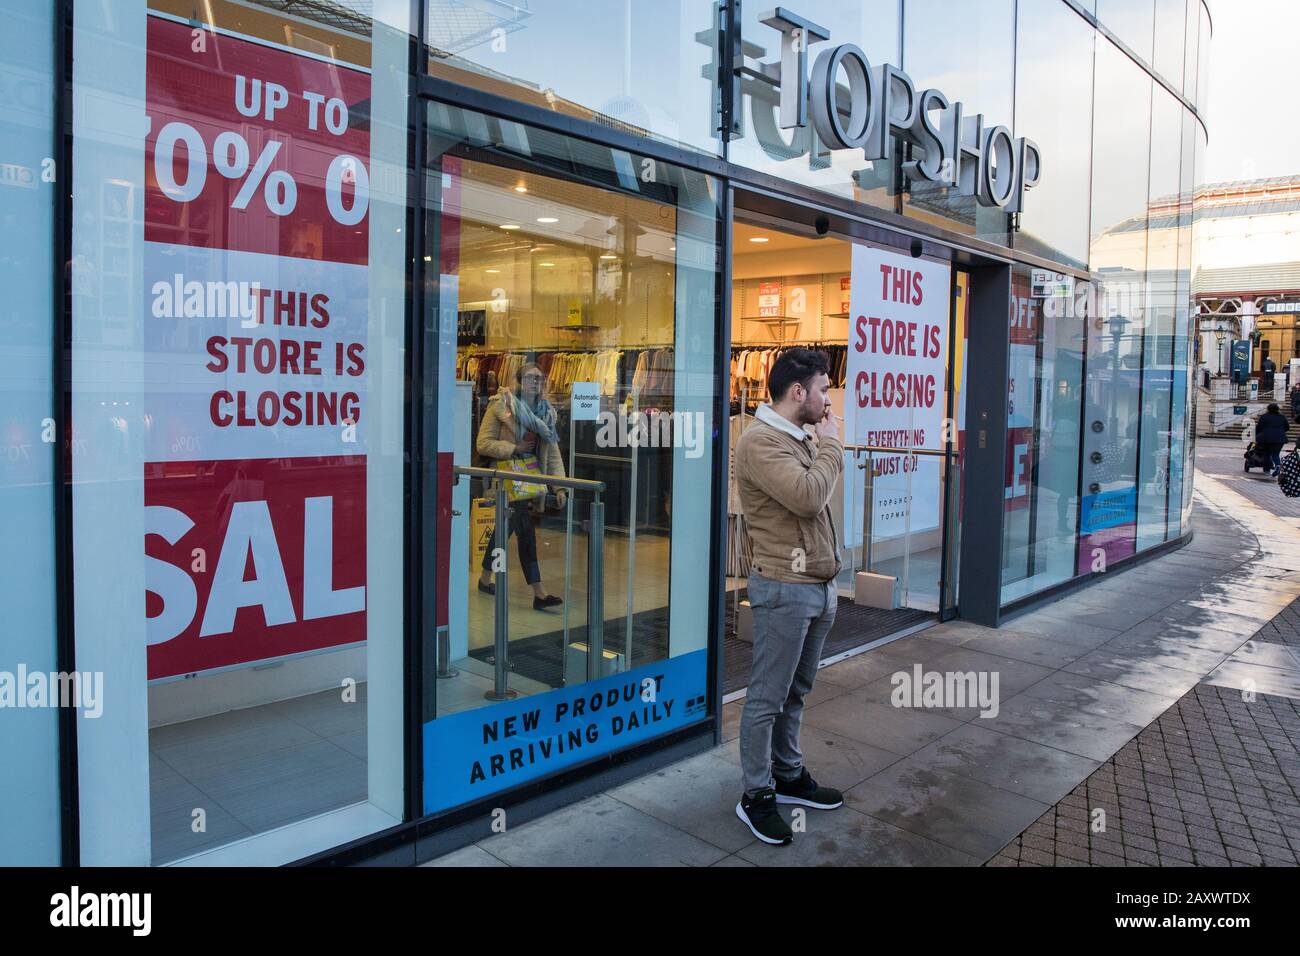 Windsor, UK. 13 February, 2020. A Topshop store in Windsor Yards, a  shopping area in the heart of the historic town, displays closing down  notices. A nearby New Look store is also